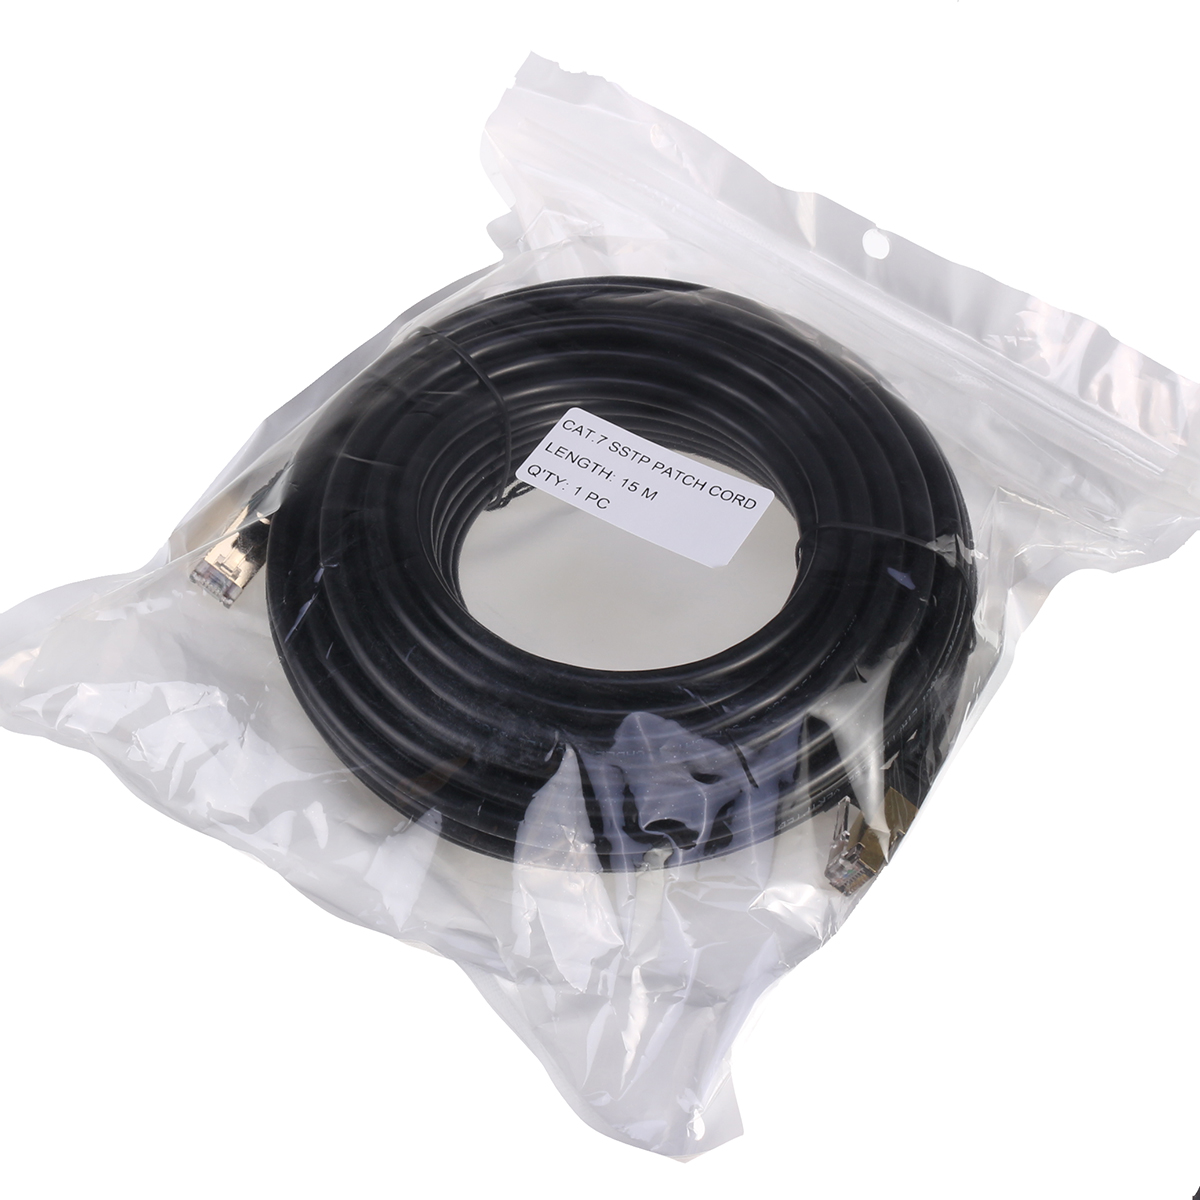 Black-Cat7-28AWG-High-Speed-Pure-Copper-Core-Networking-Cable-Cat7-Cable-LAN-Network-RJ45-Patch-Cord-1621196-8